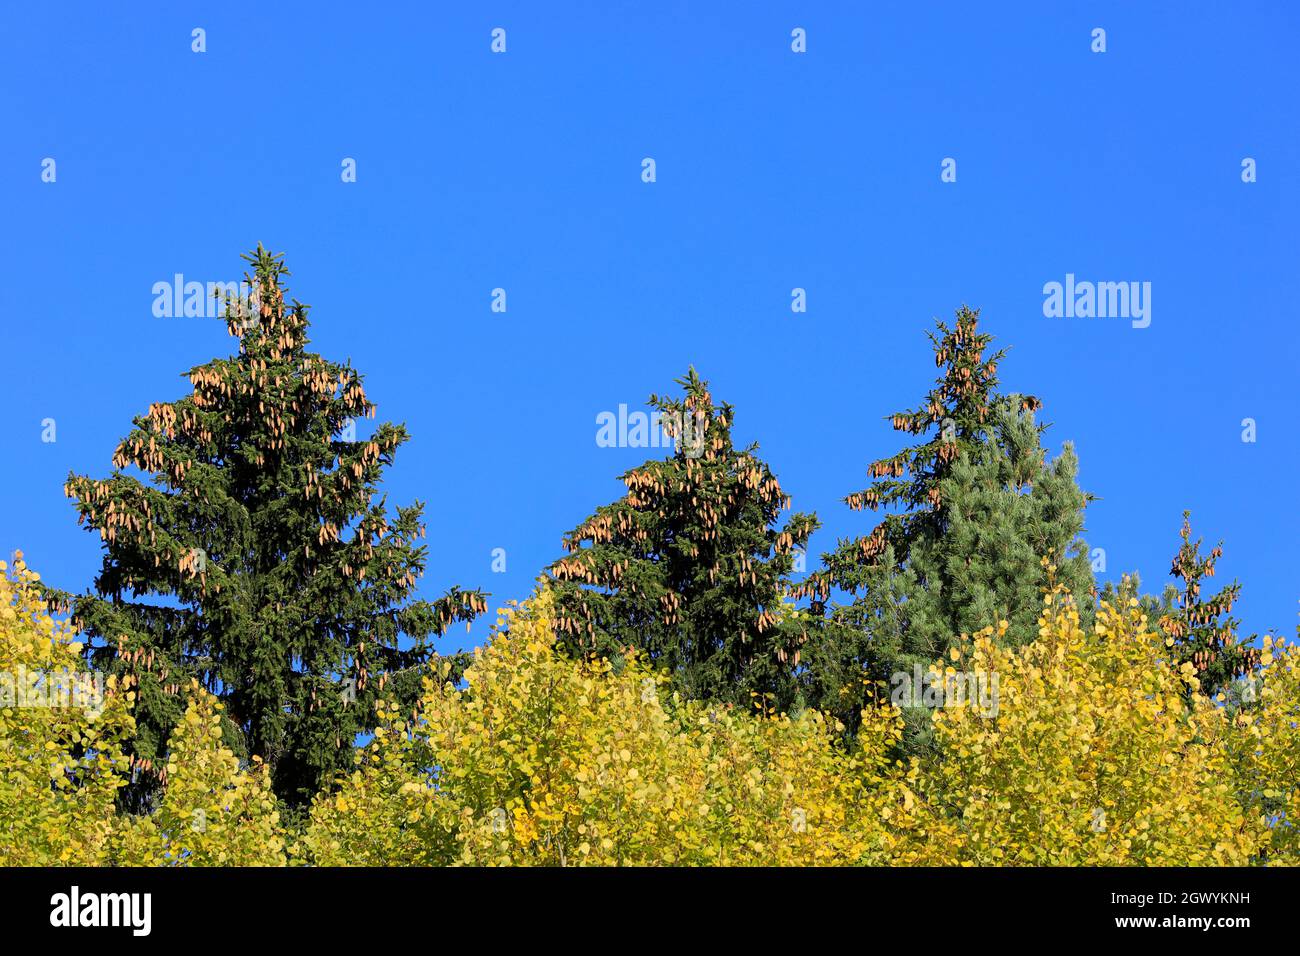 Picea abies, spruce tree tops with lots of cones against blue sky on a sunny day. Aspen trees have a vibrant yellow color. Finland, September 2021. Stock Photo